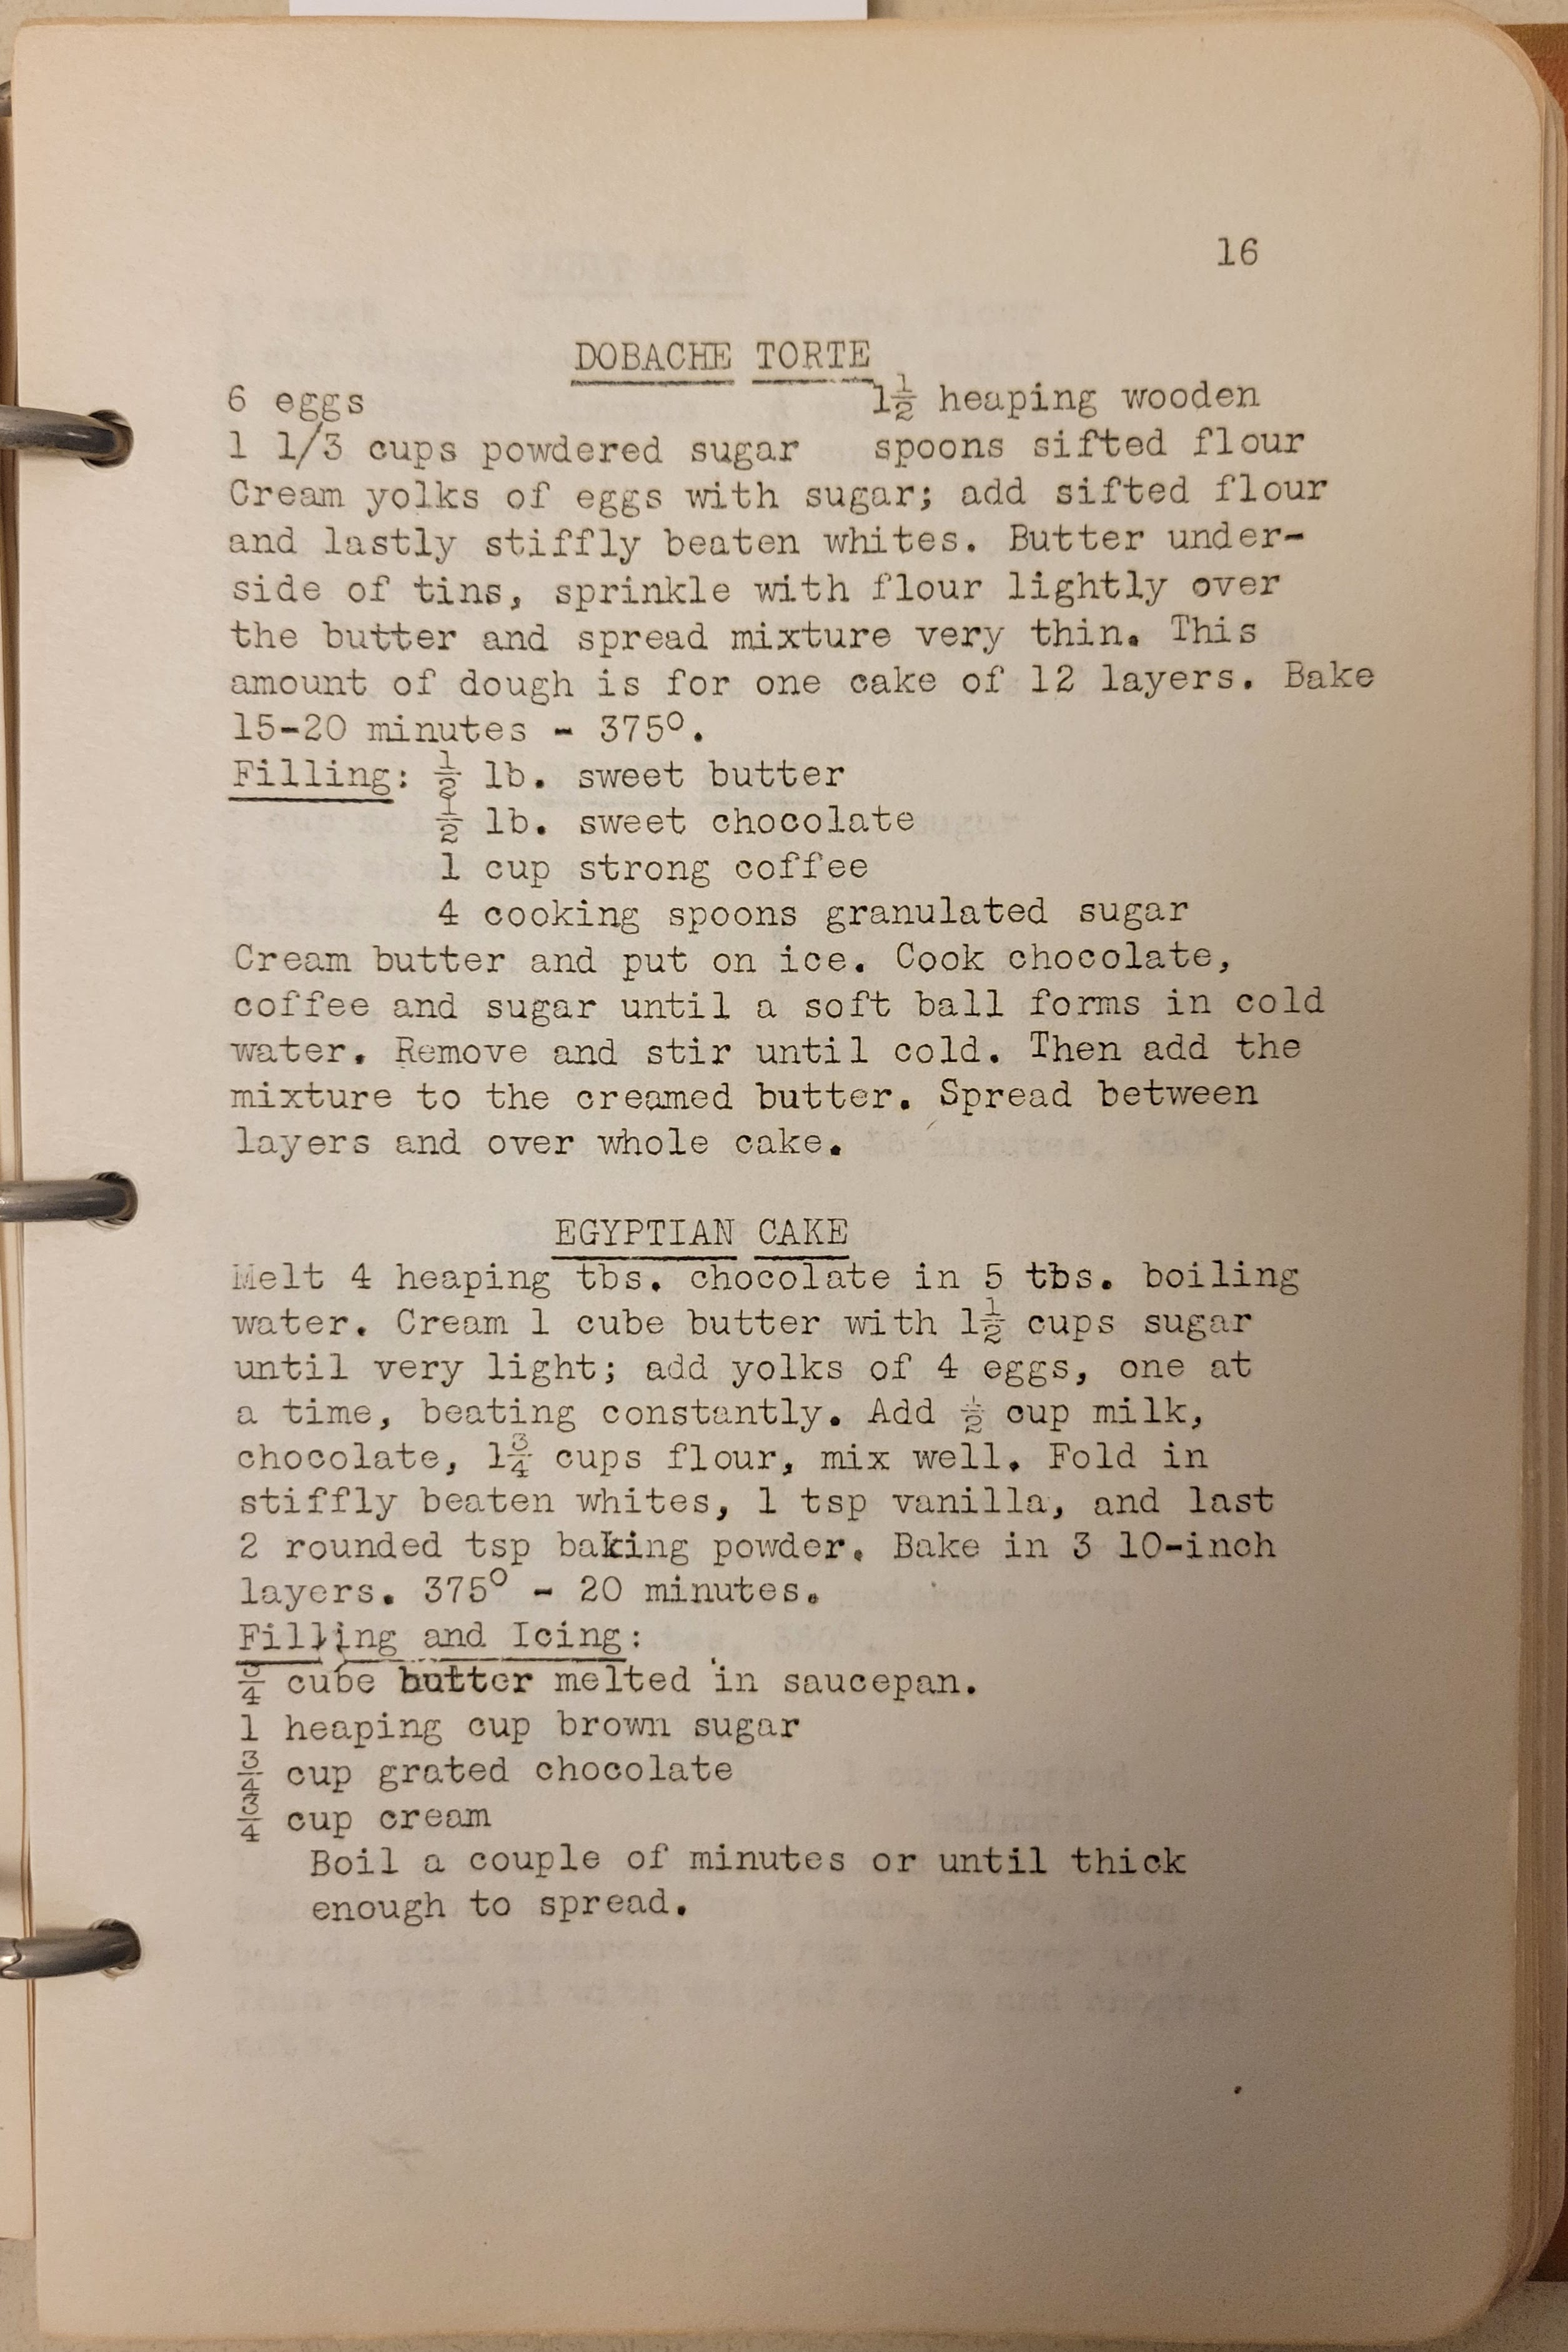 typewritten page in a 3-ring binder with recipes for Dobache Torte and Egyptian Cake